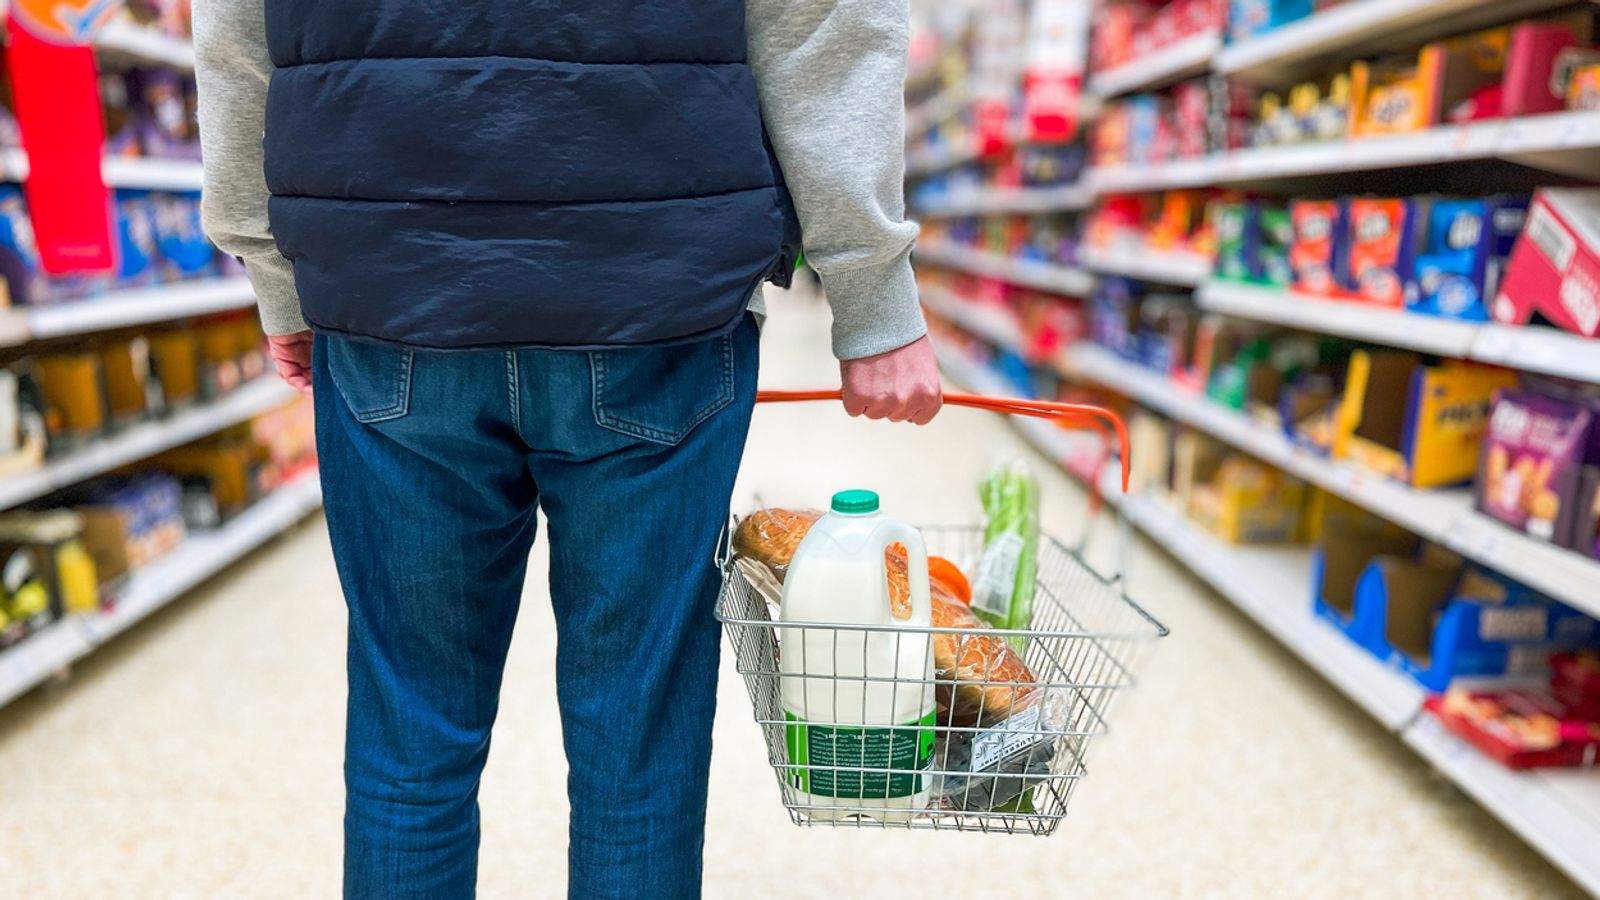 Grocery inflation 'back in single digits' - as supermarket with fastest sales growth named